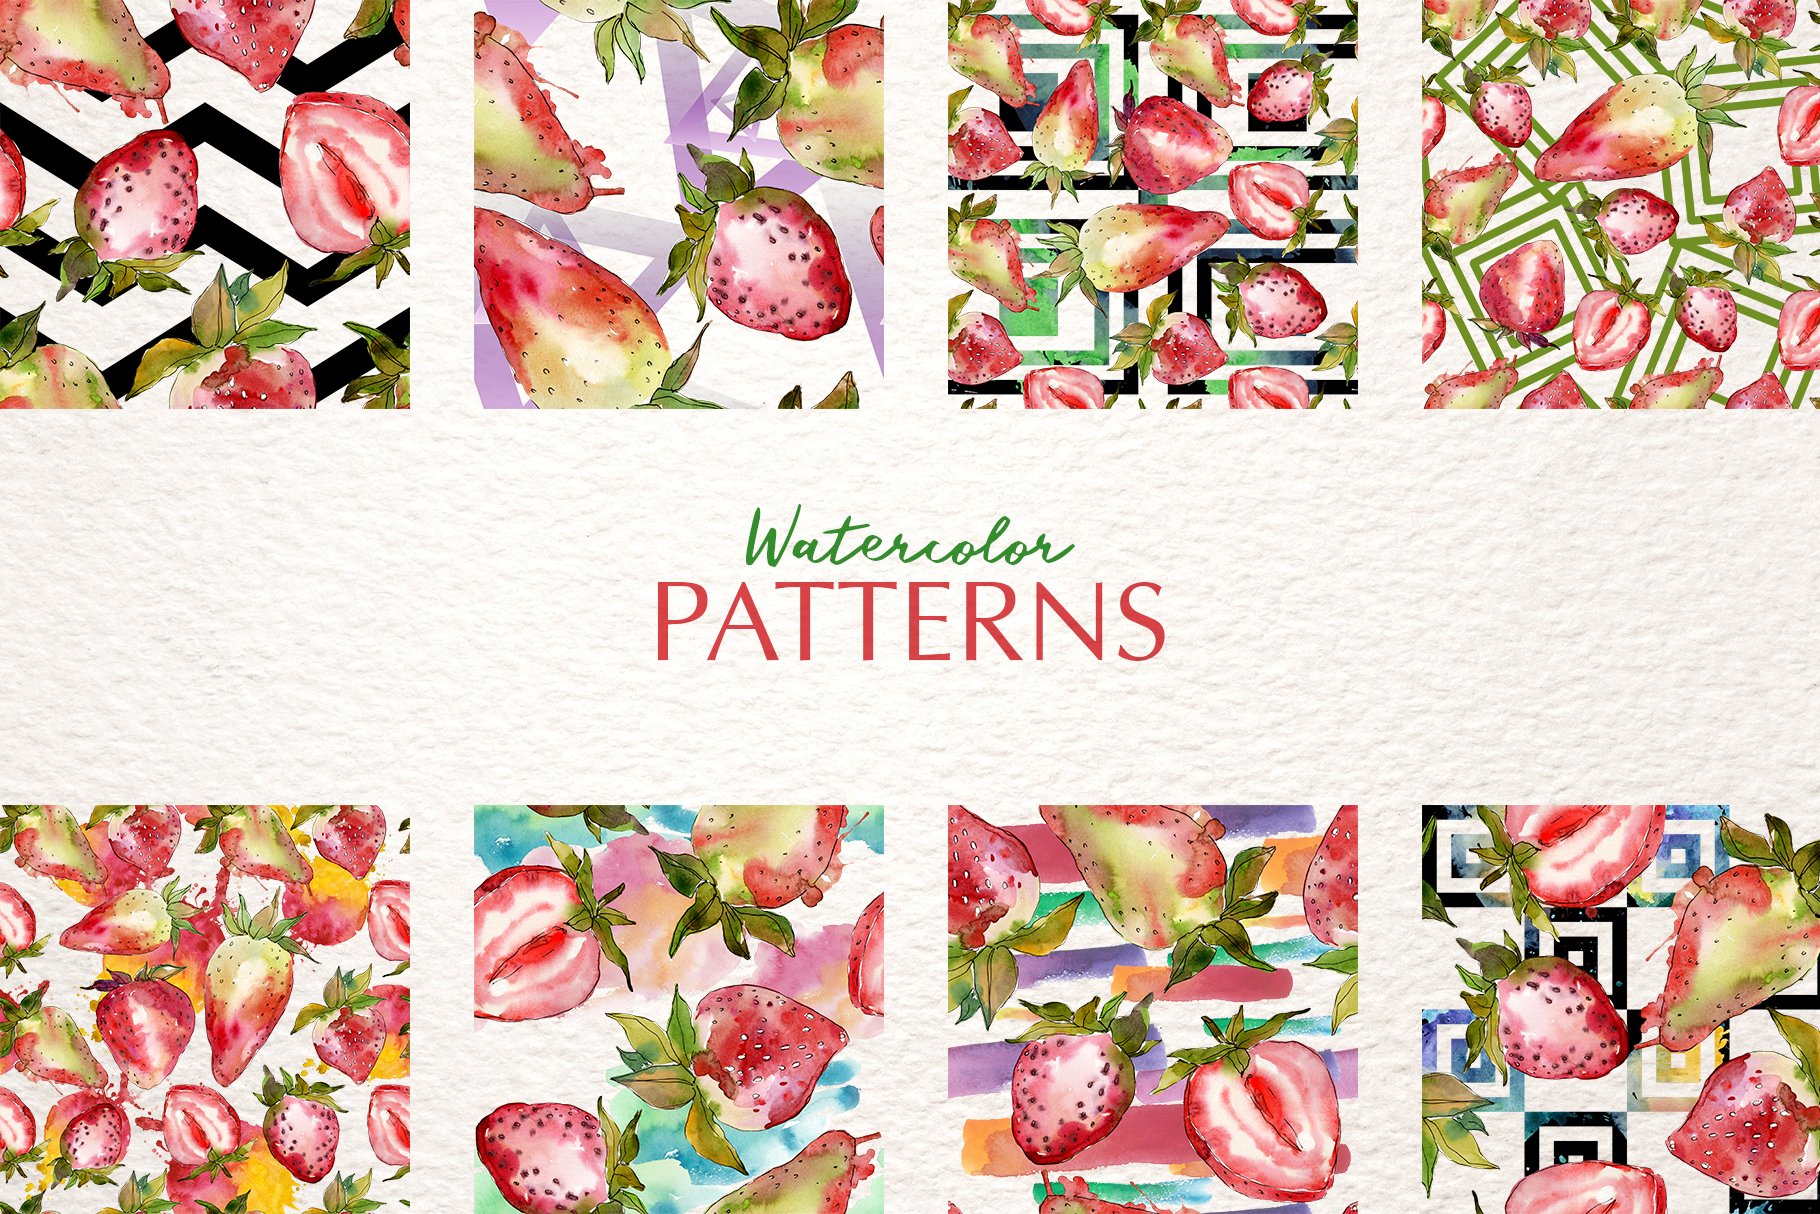 Some high quality strawberries patterns.